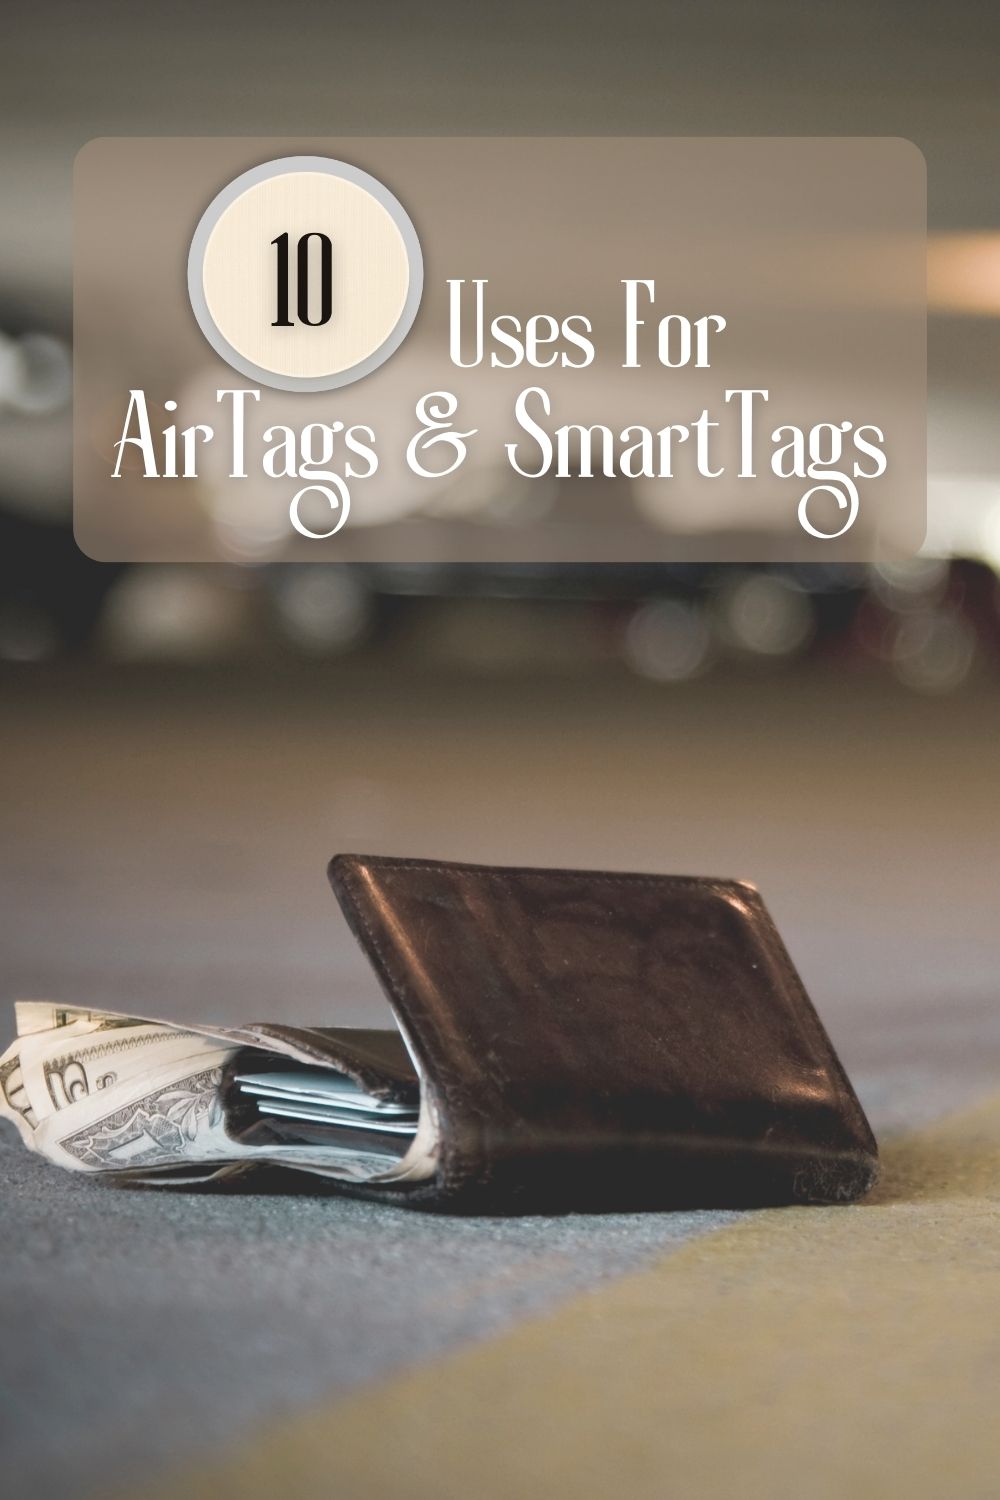 Wondering how to use Apple AirTags and Samsung Galaxy SmartTags? Here's a list of some of their best uses (and not so great uses). 